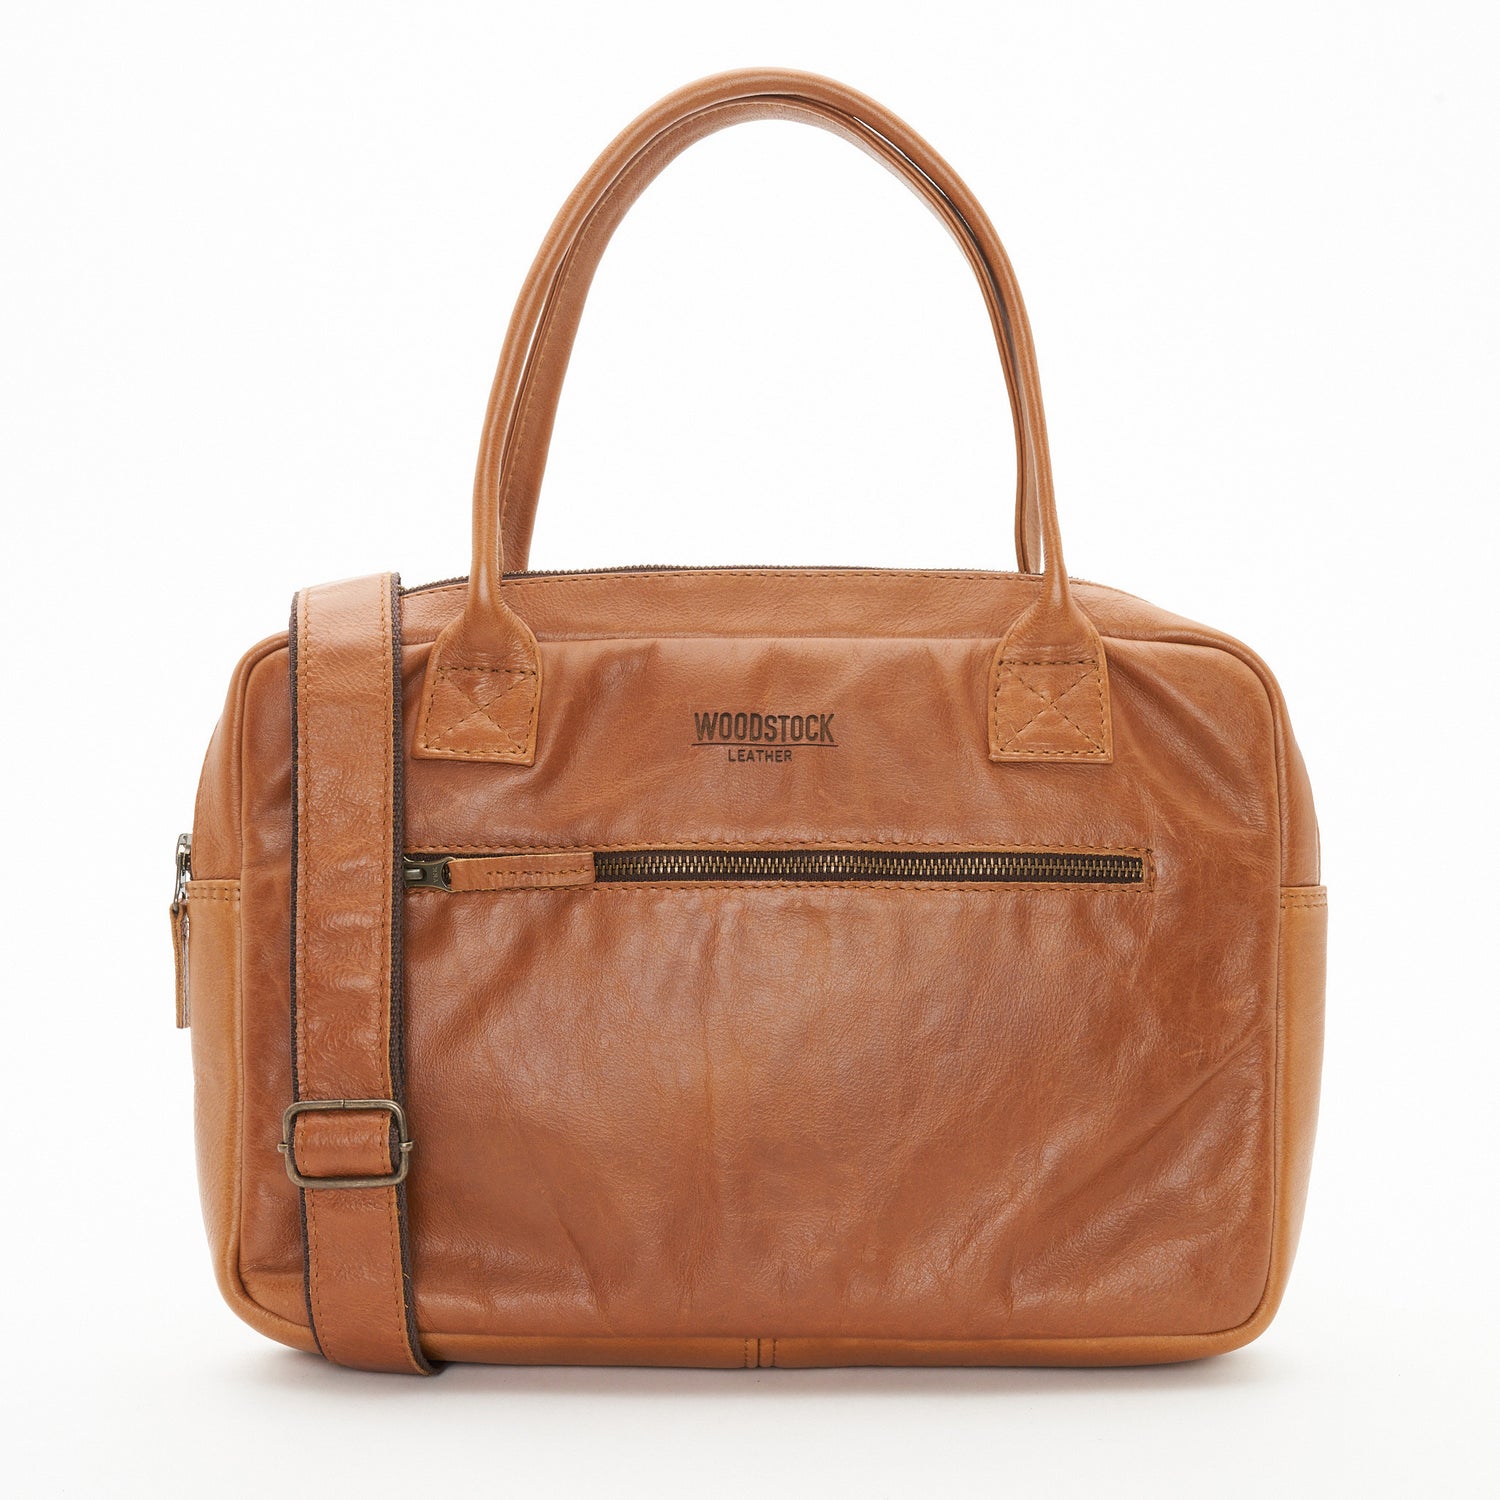 7 Reasons Why Genuine Leather is the Best for Laptop Bags